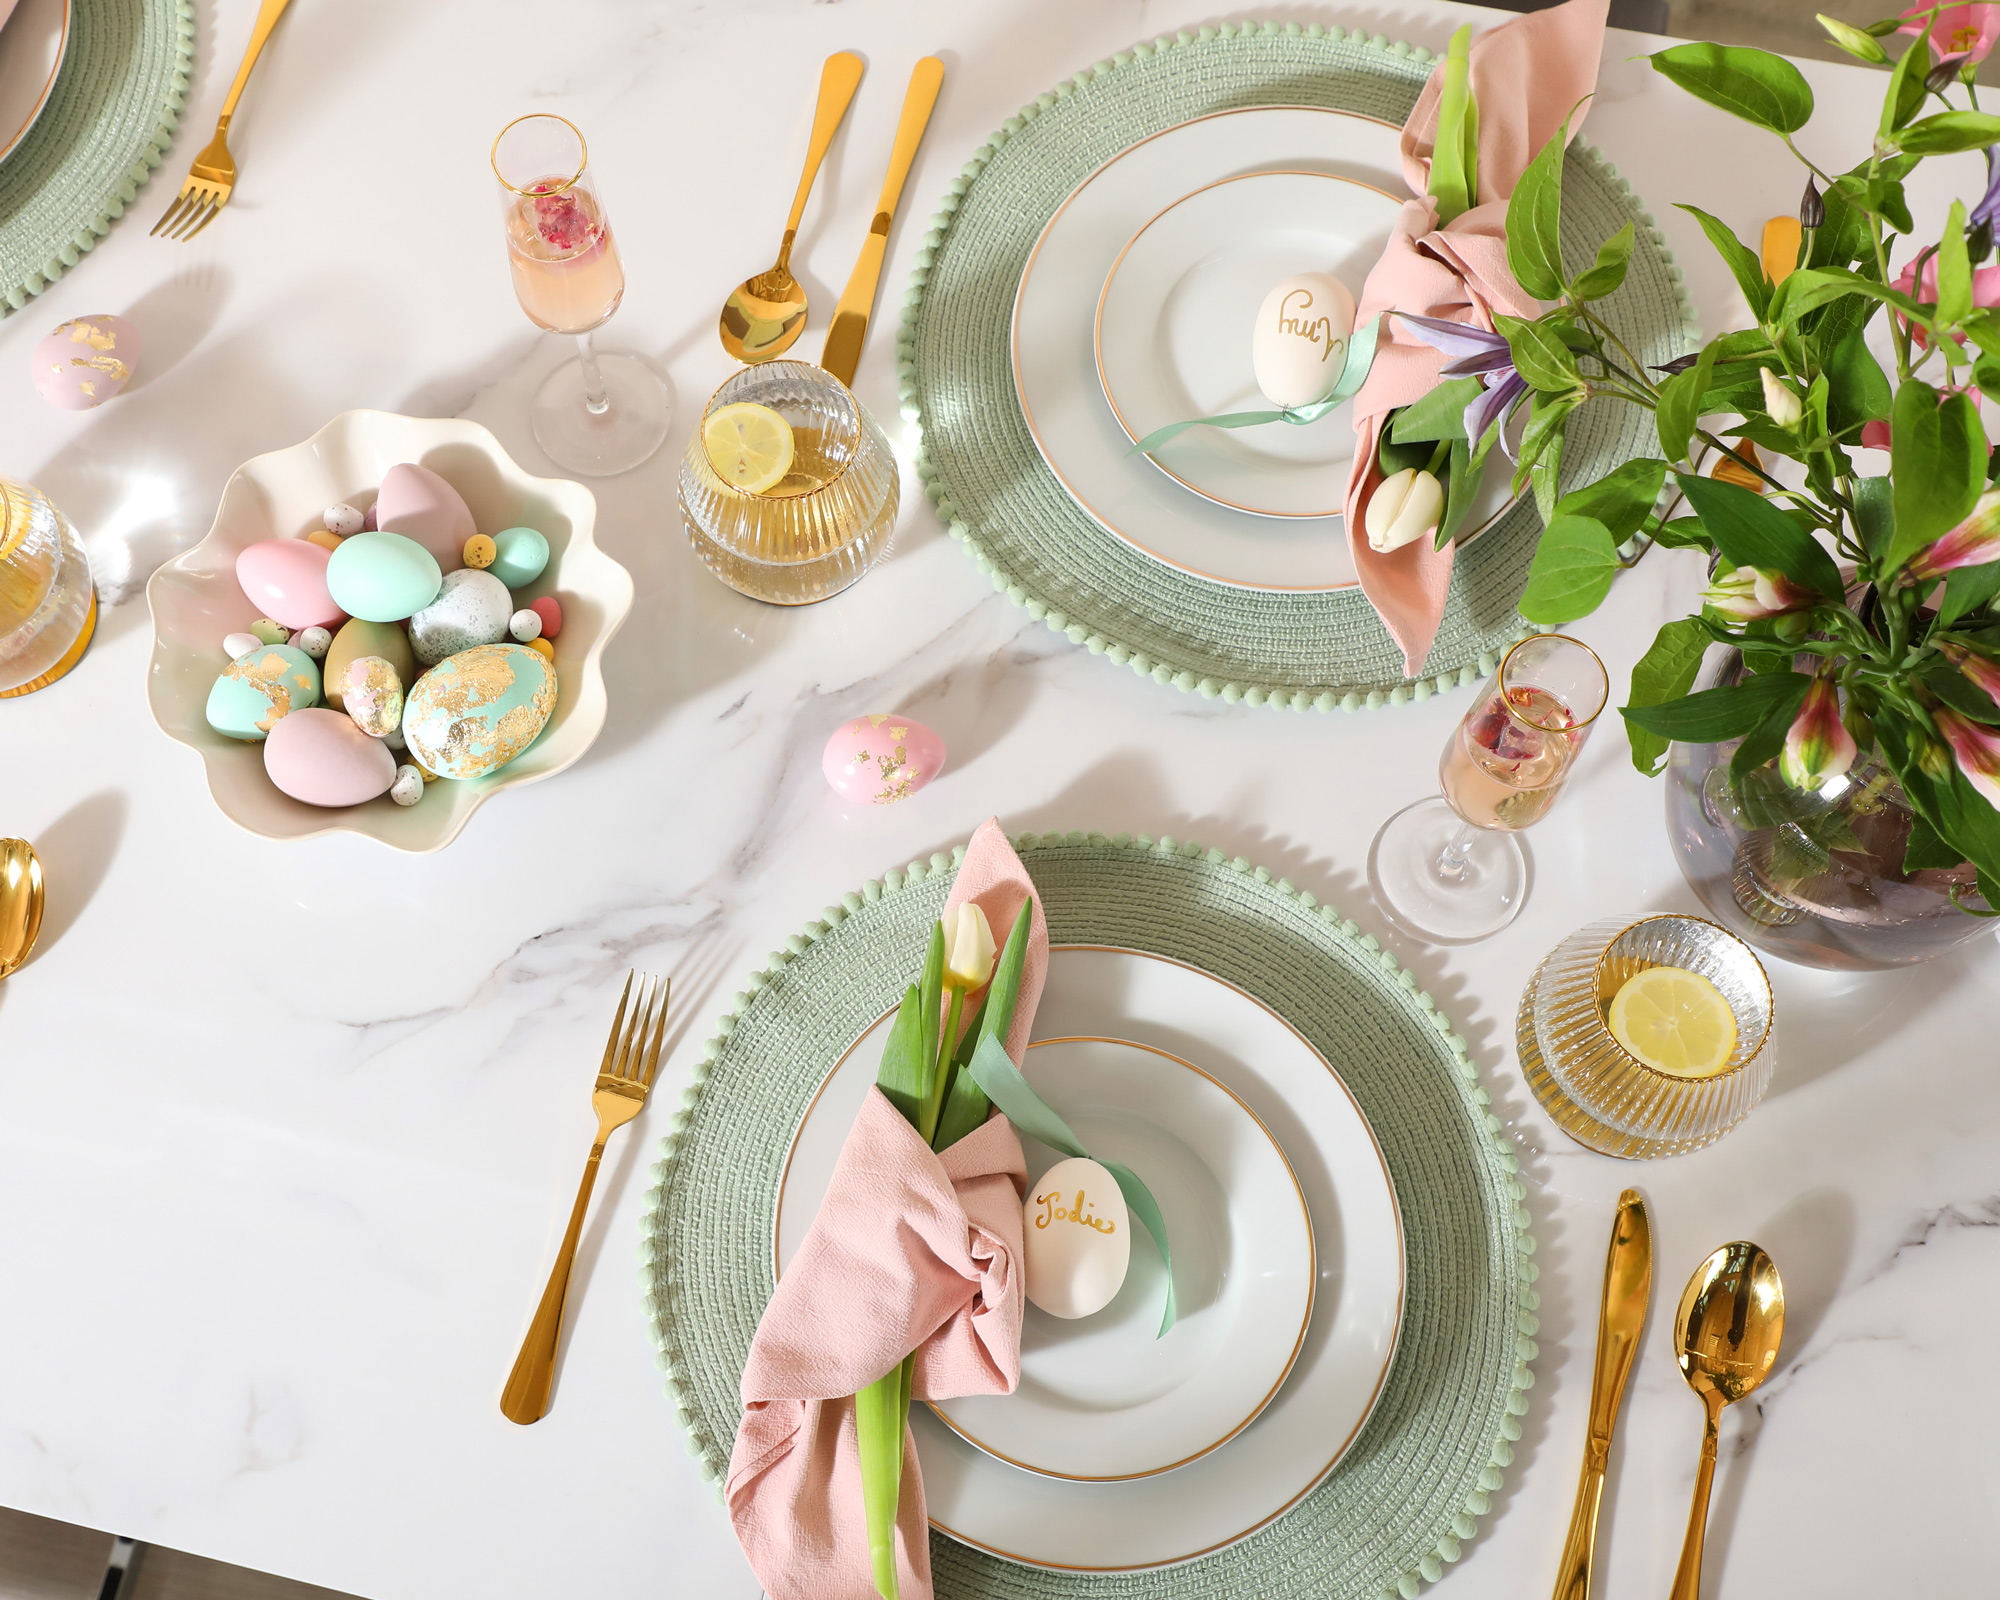 7 Easter table decor ideas that are simple and seasonal